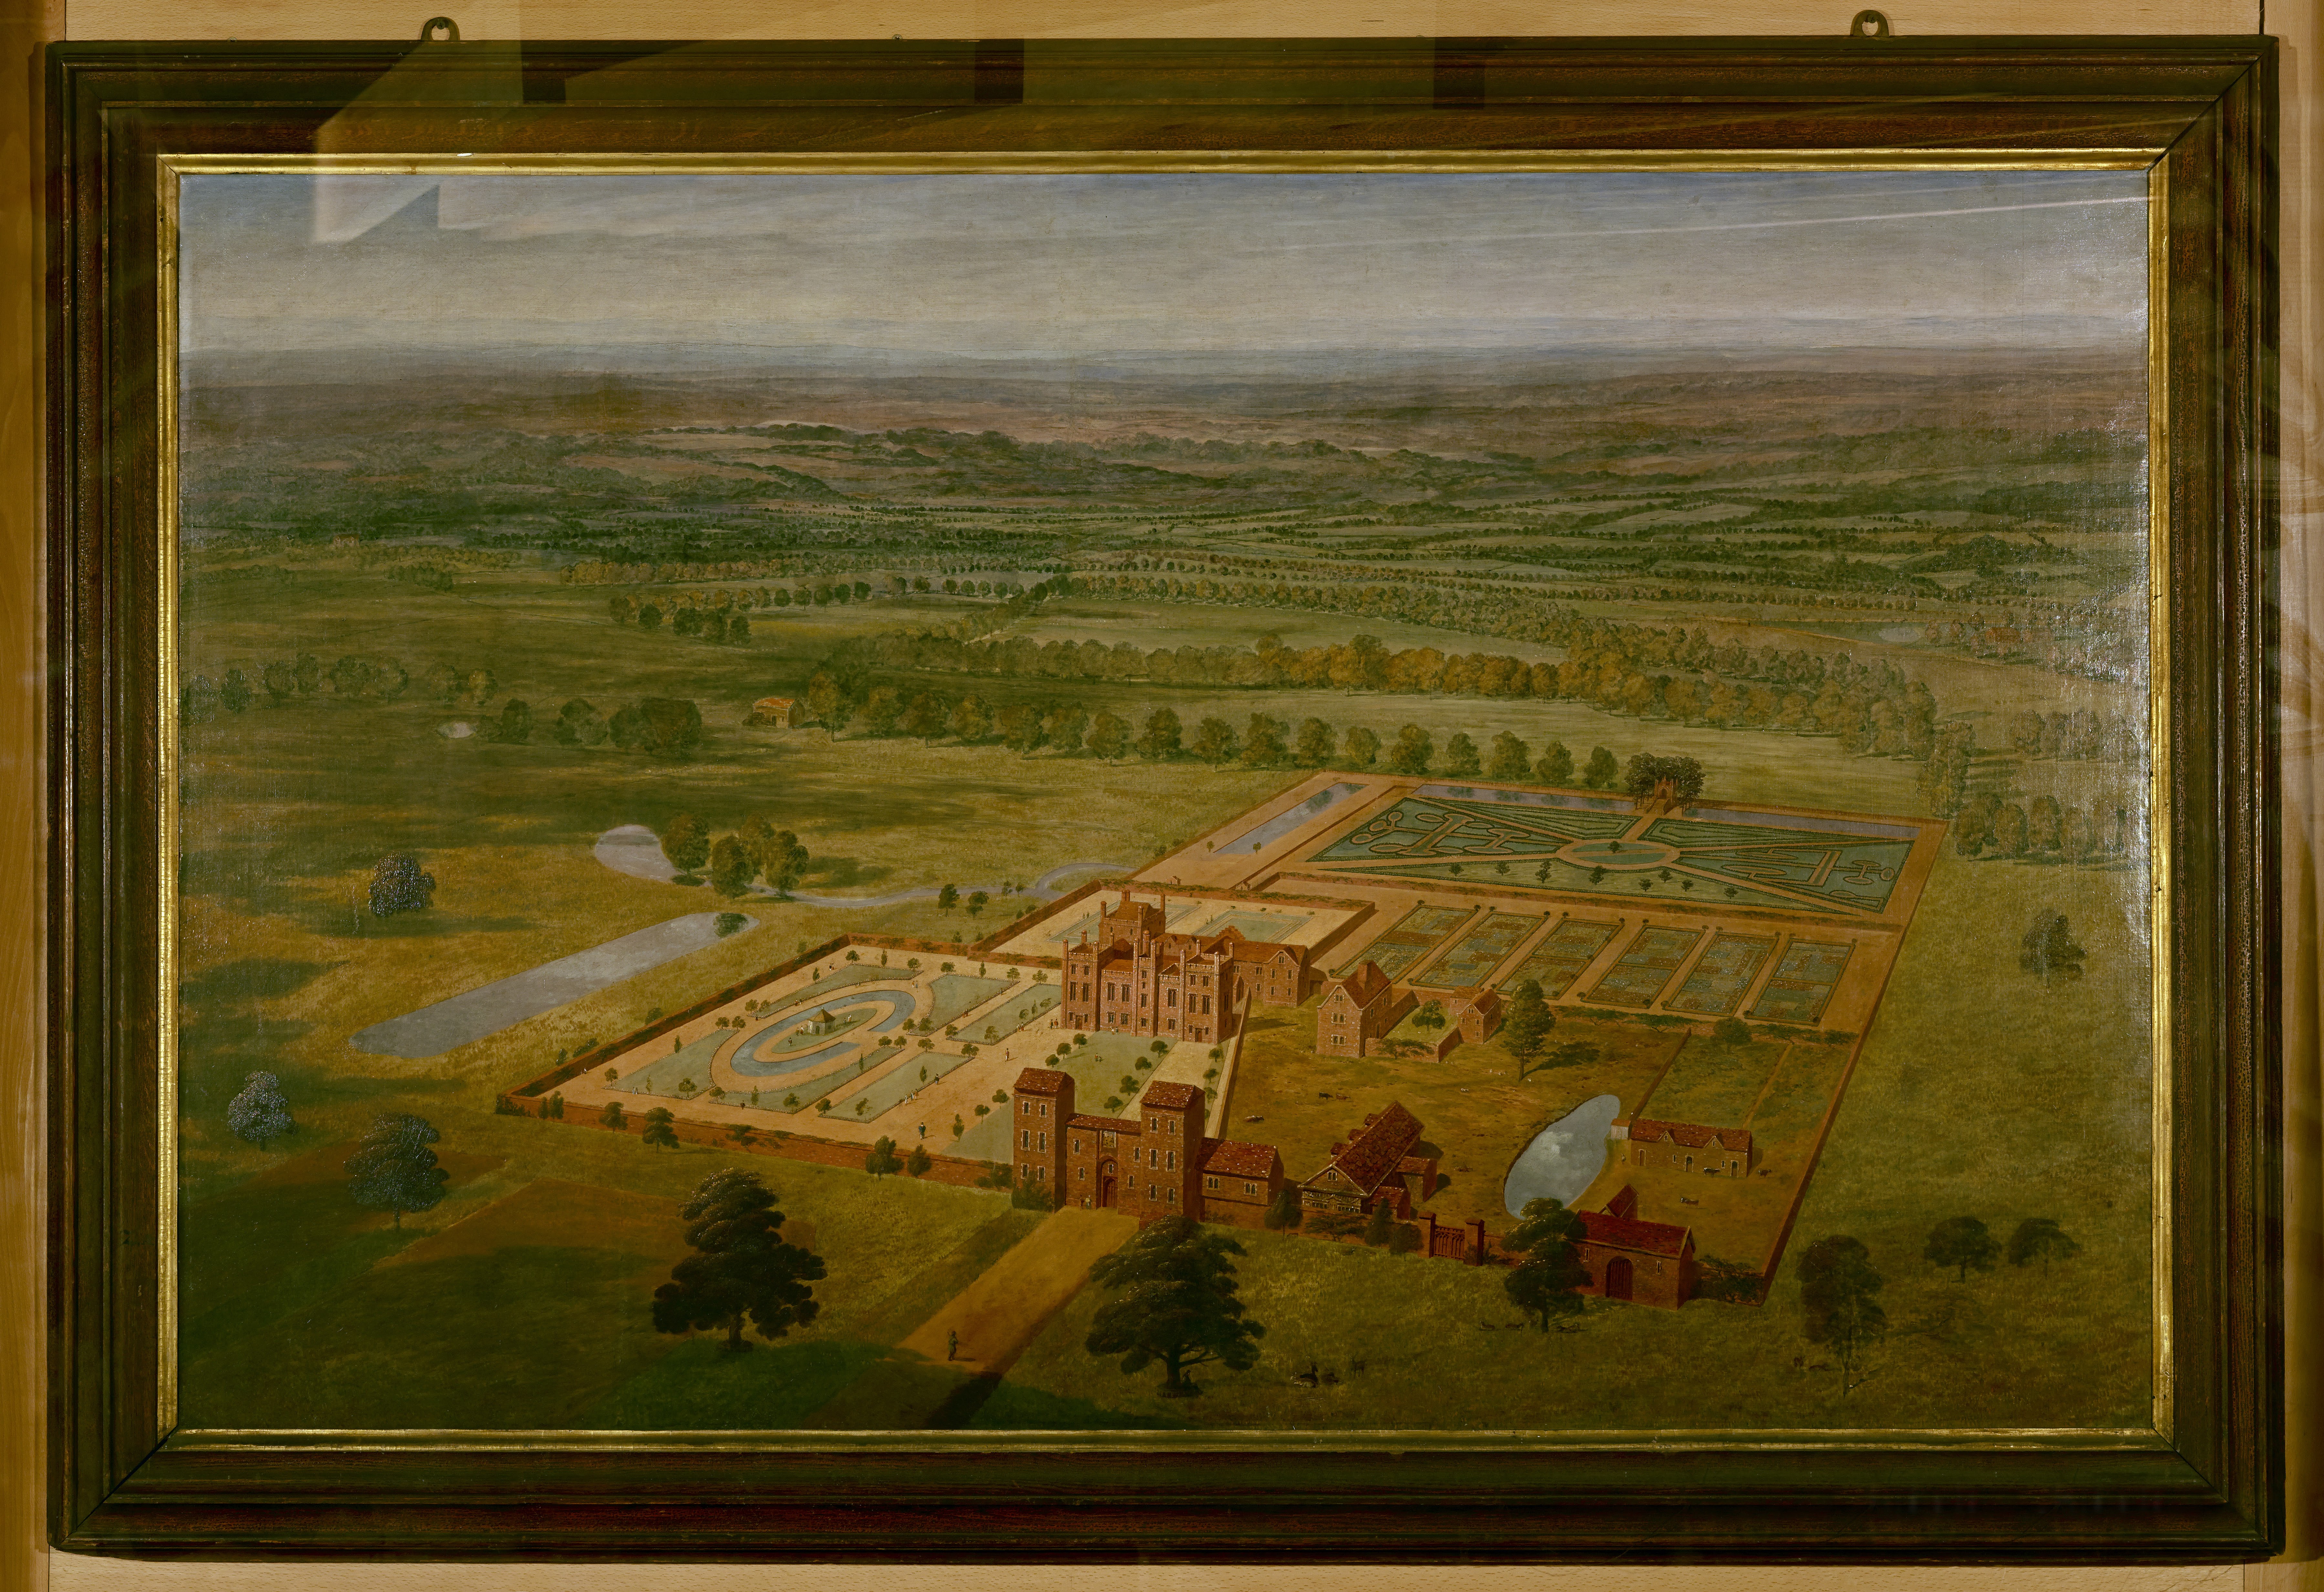 A painting of Belhus Mansion from around 1710, by an unknown artist in the style of Jan Siberechts. (Thurrock Museum/ PA)